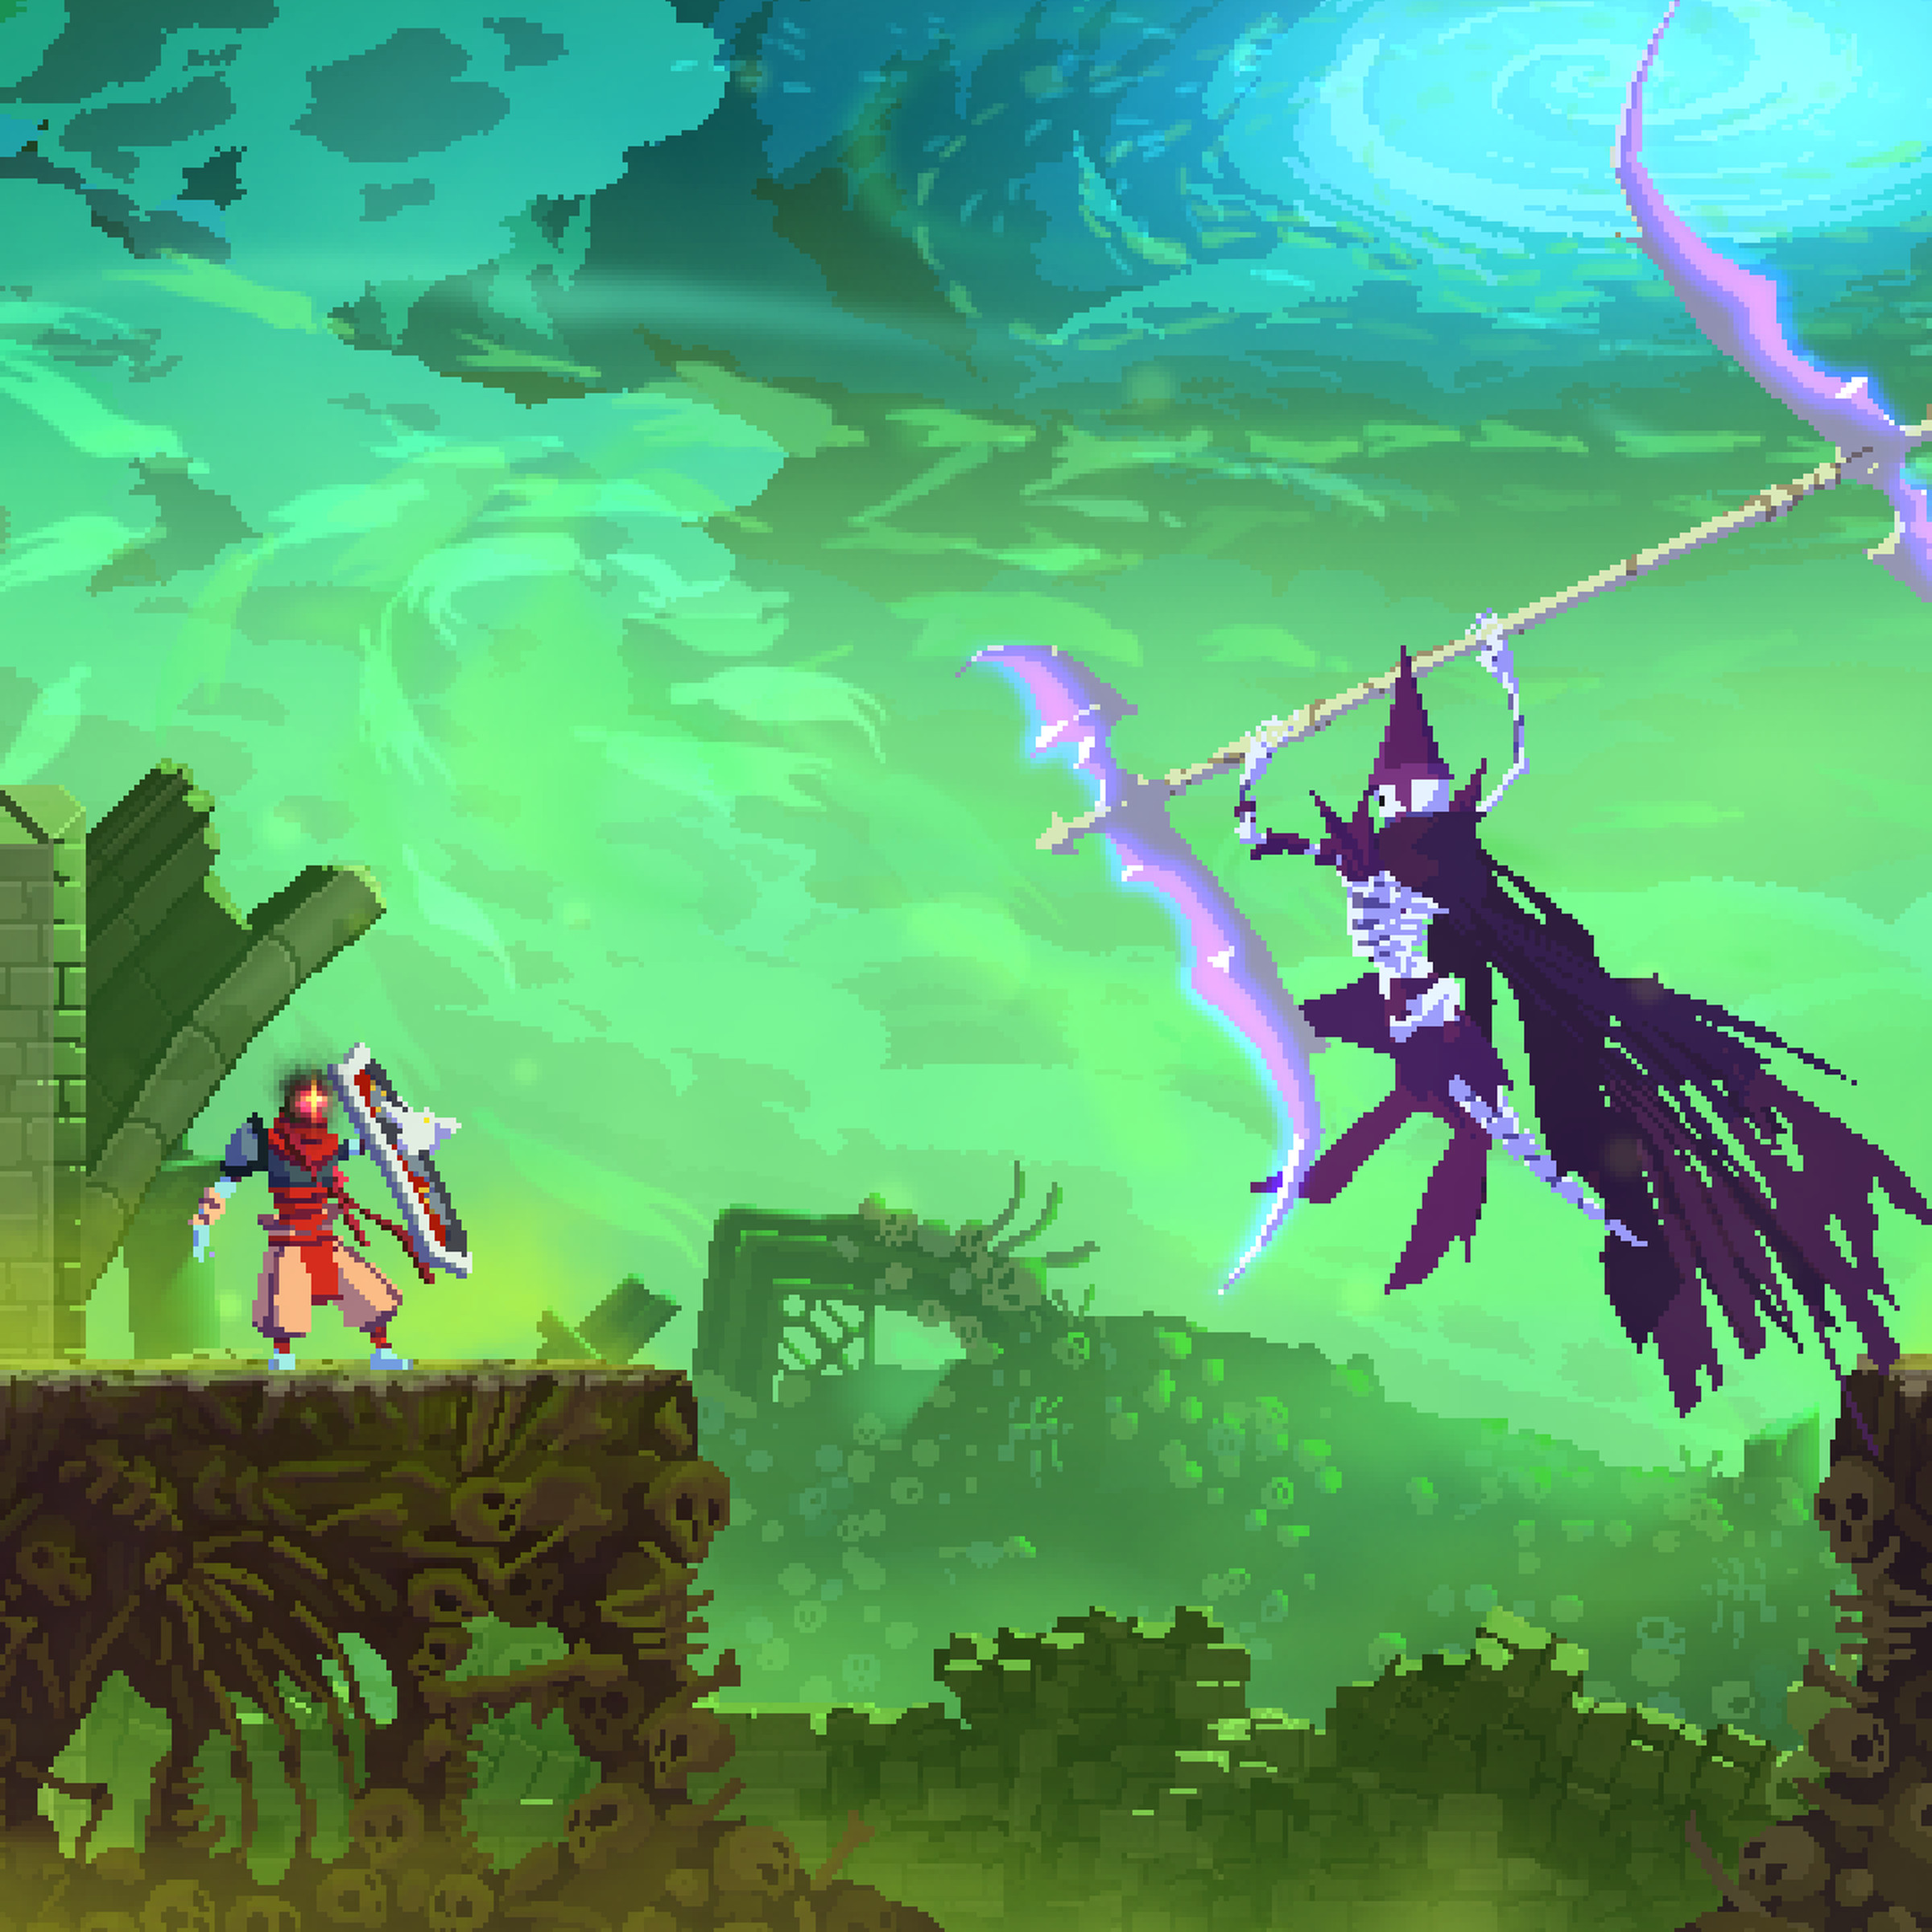 A screenshot from Dead Cells: Return to Castlevania.